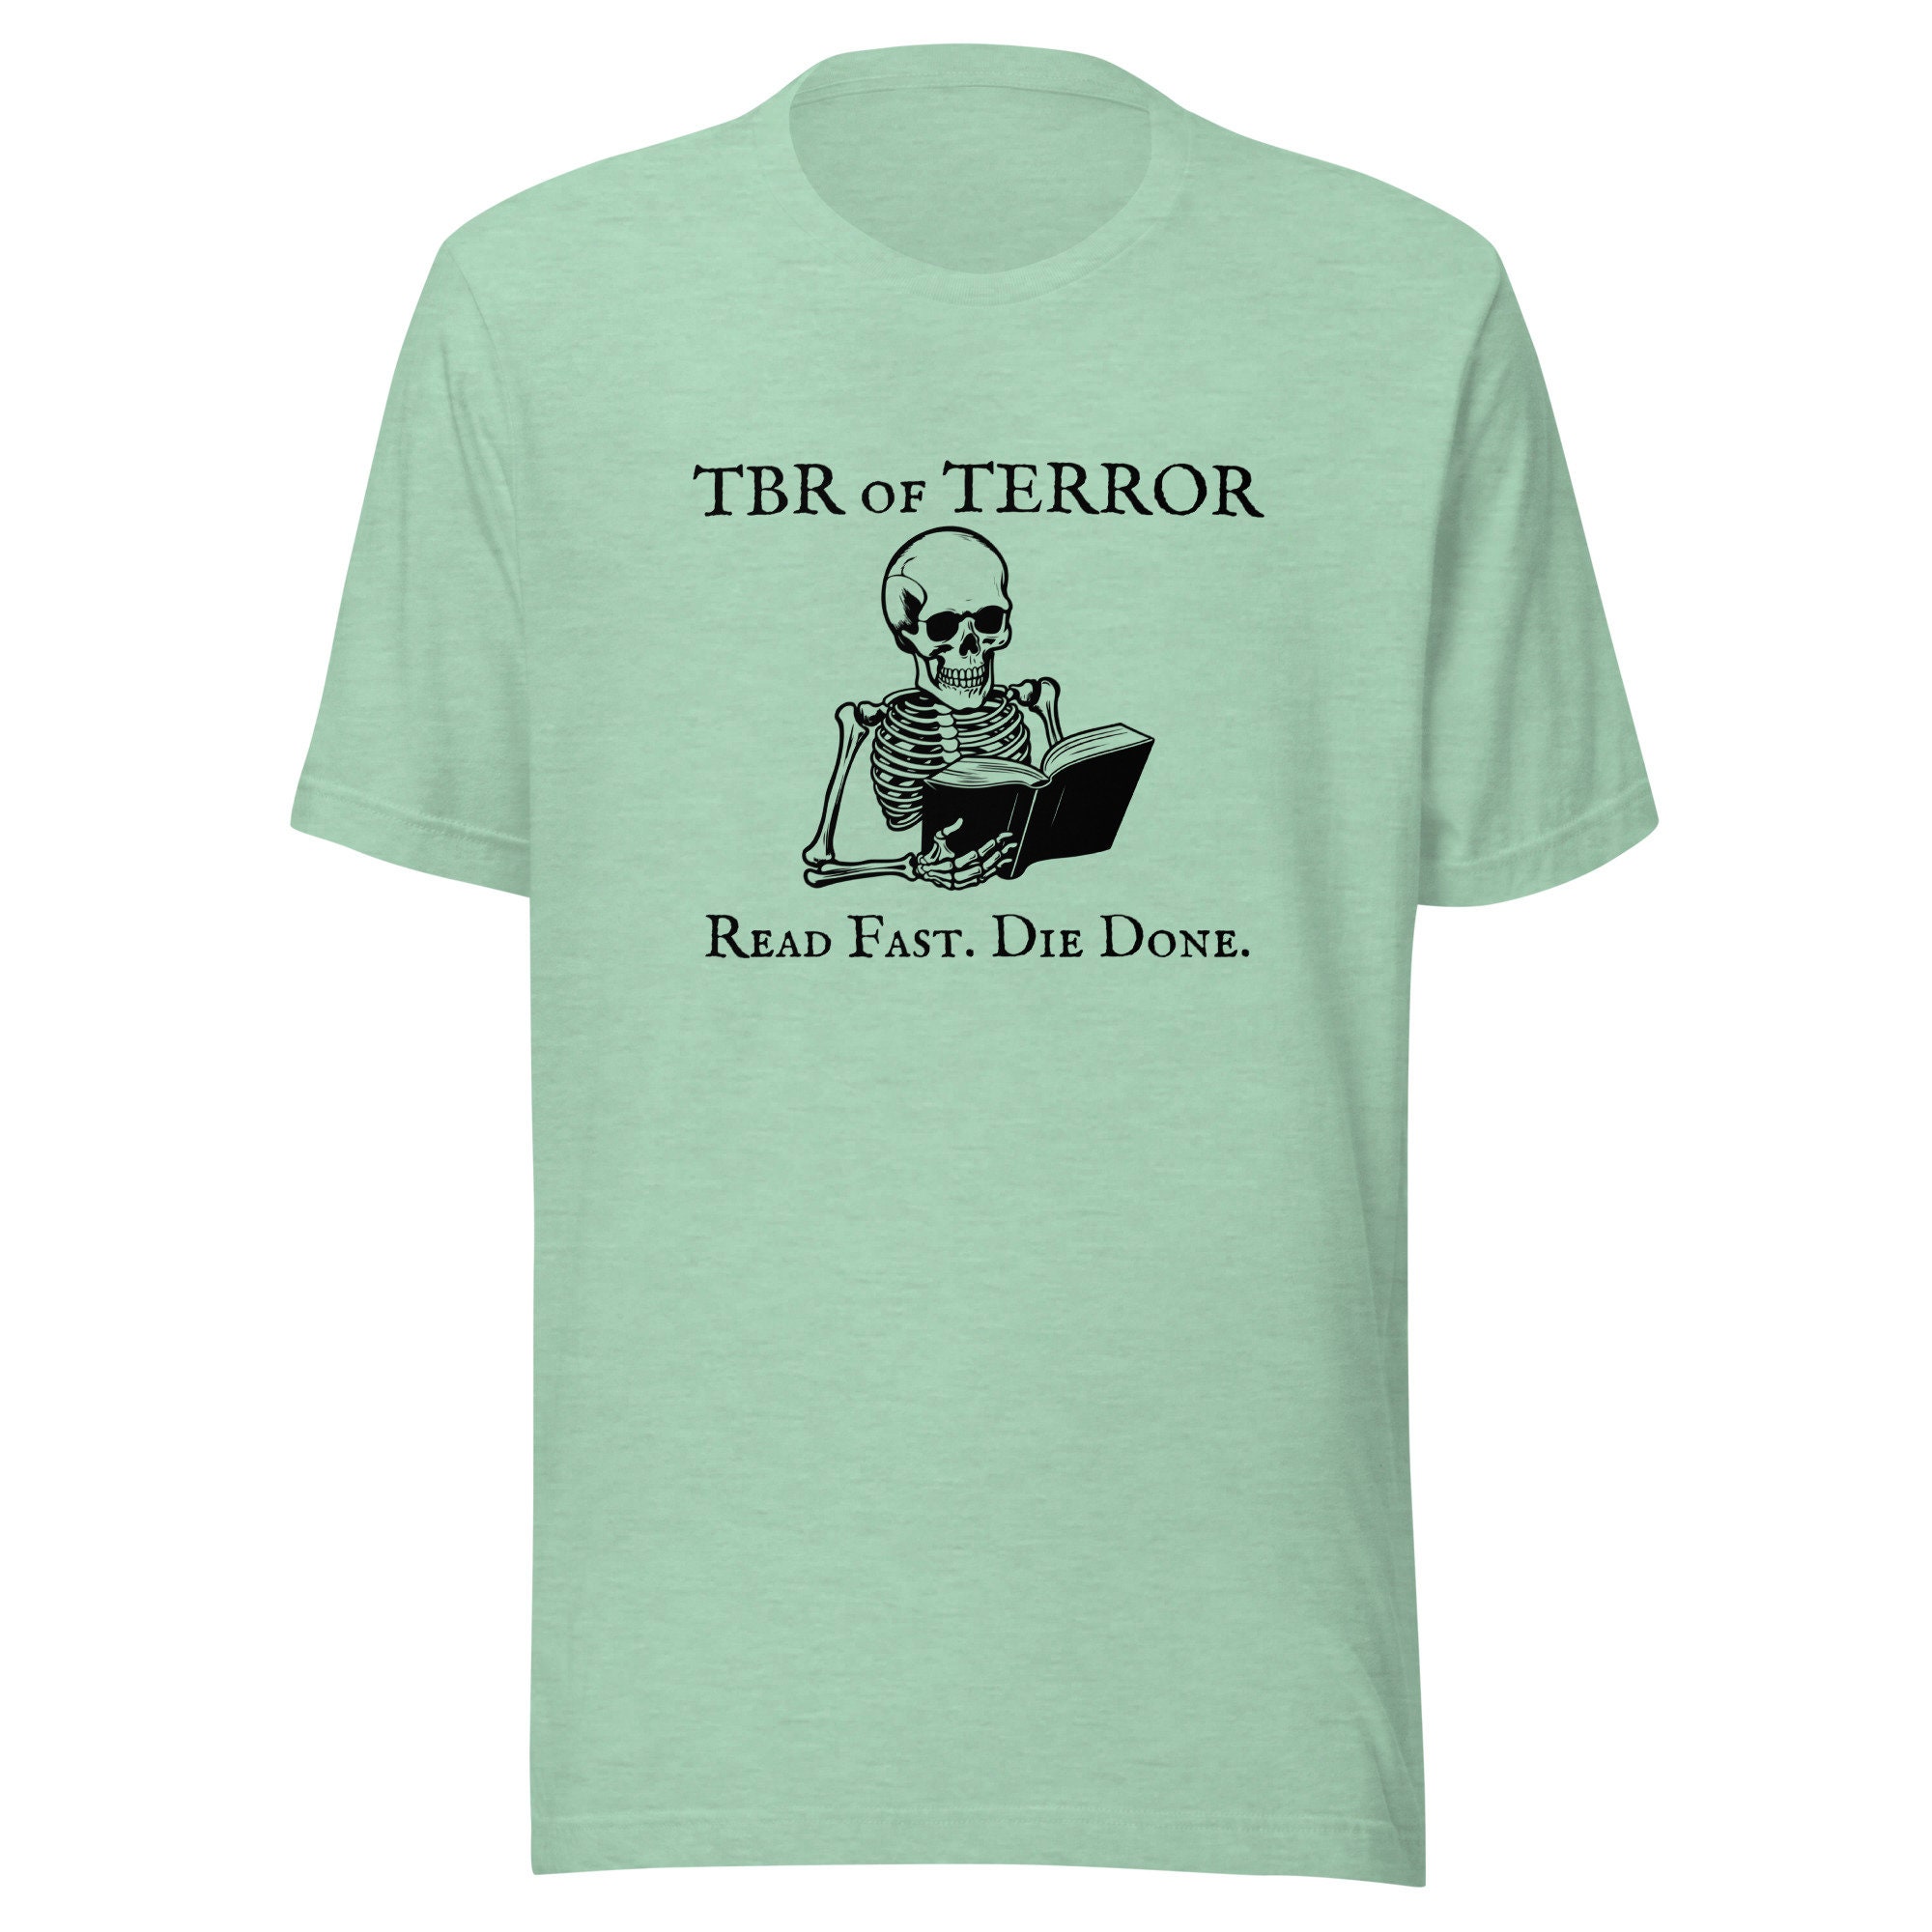 Discover TBR of Terror Halloween Graphic Tee. Spooky October t-shirt gift for readers. Funny fall skeleton book lover shirt.